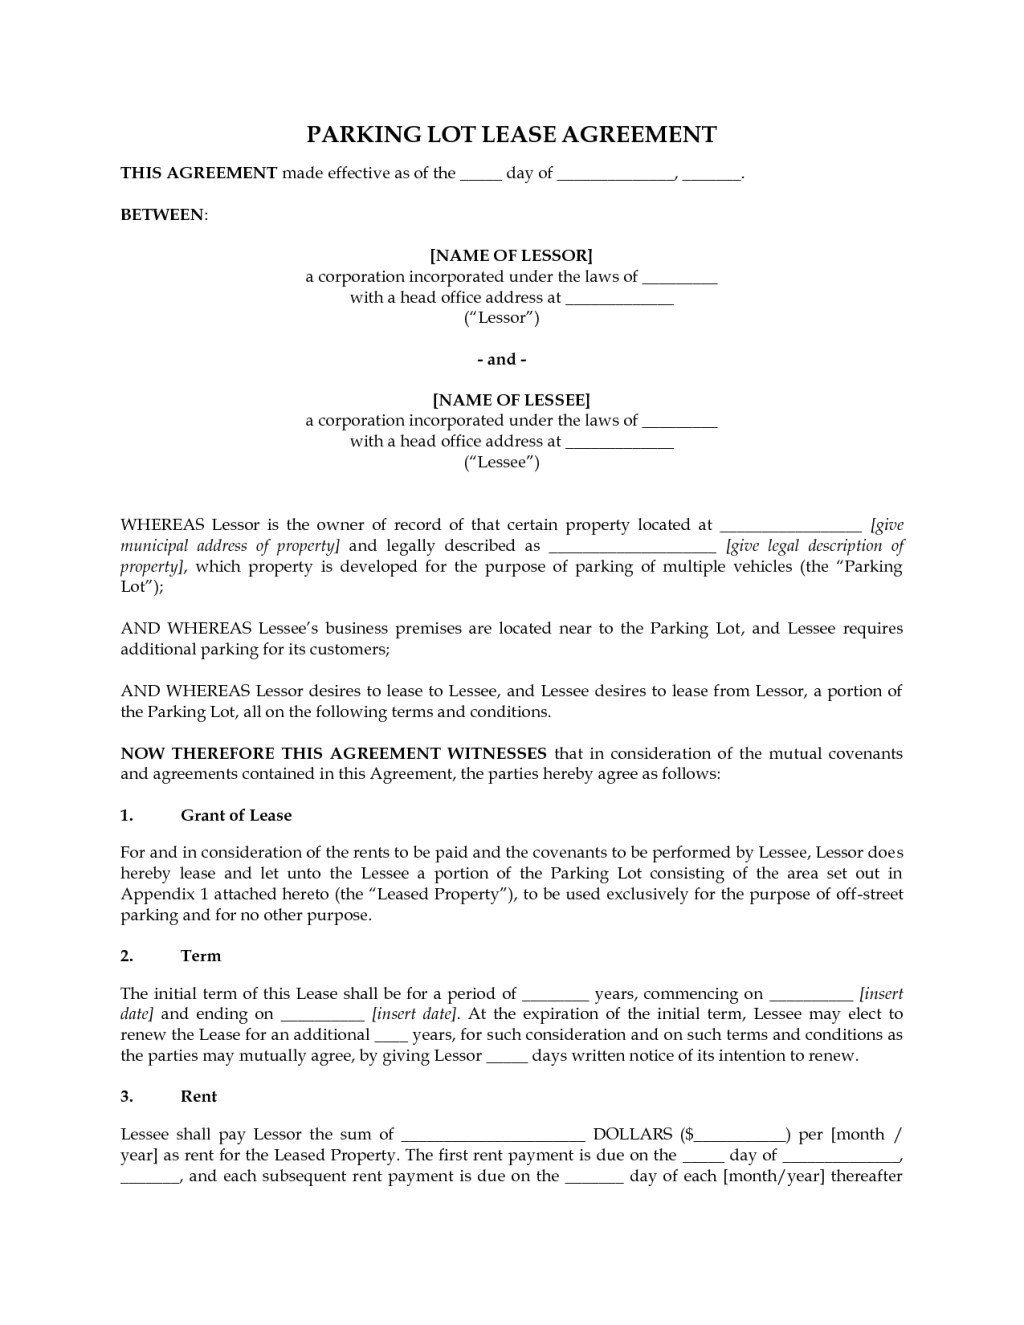 perfect lease agreement template sample for parking lot with effective date and between two parties